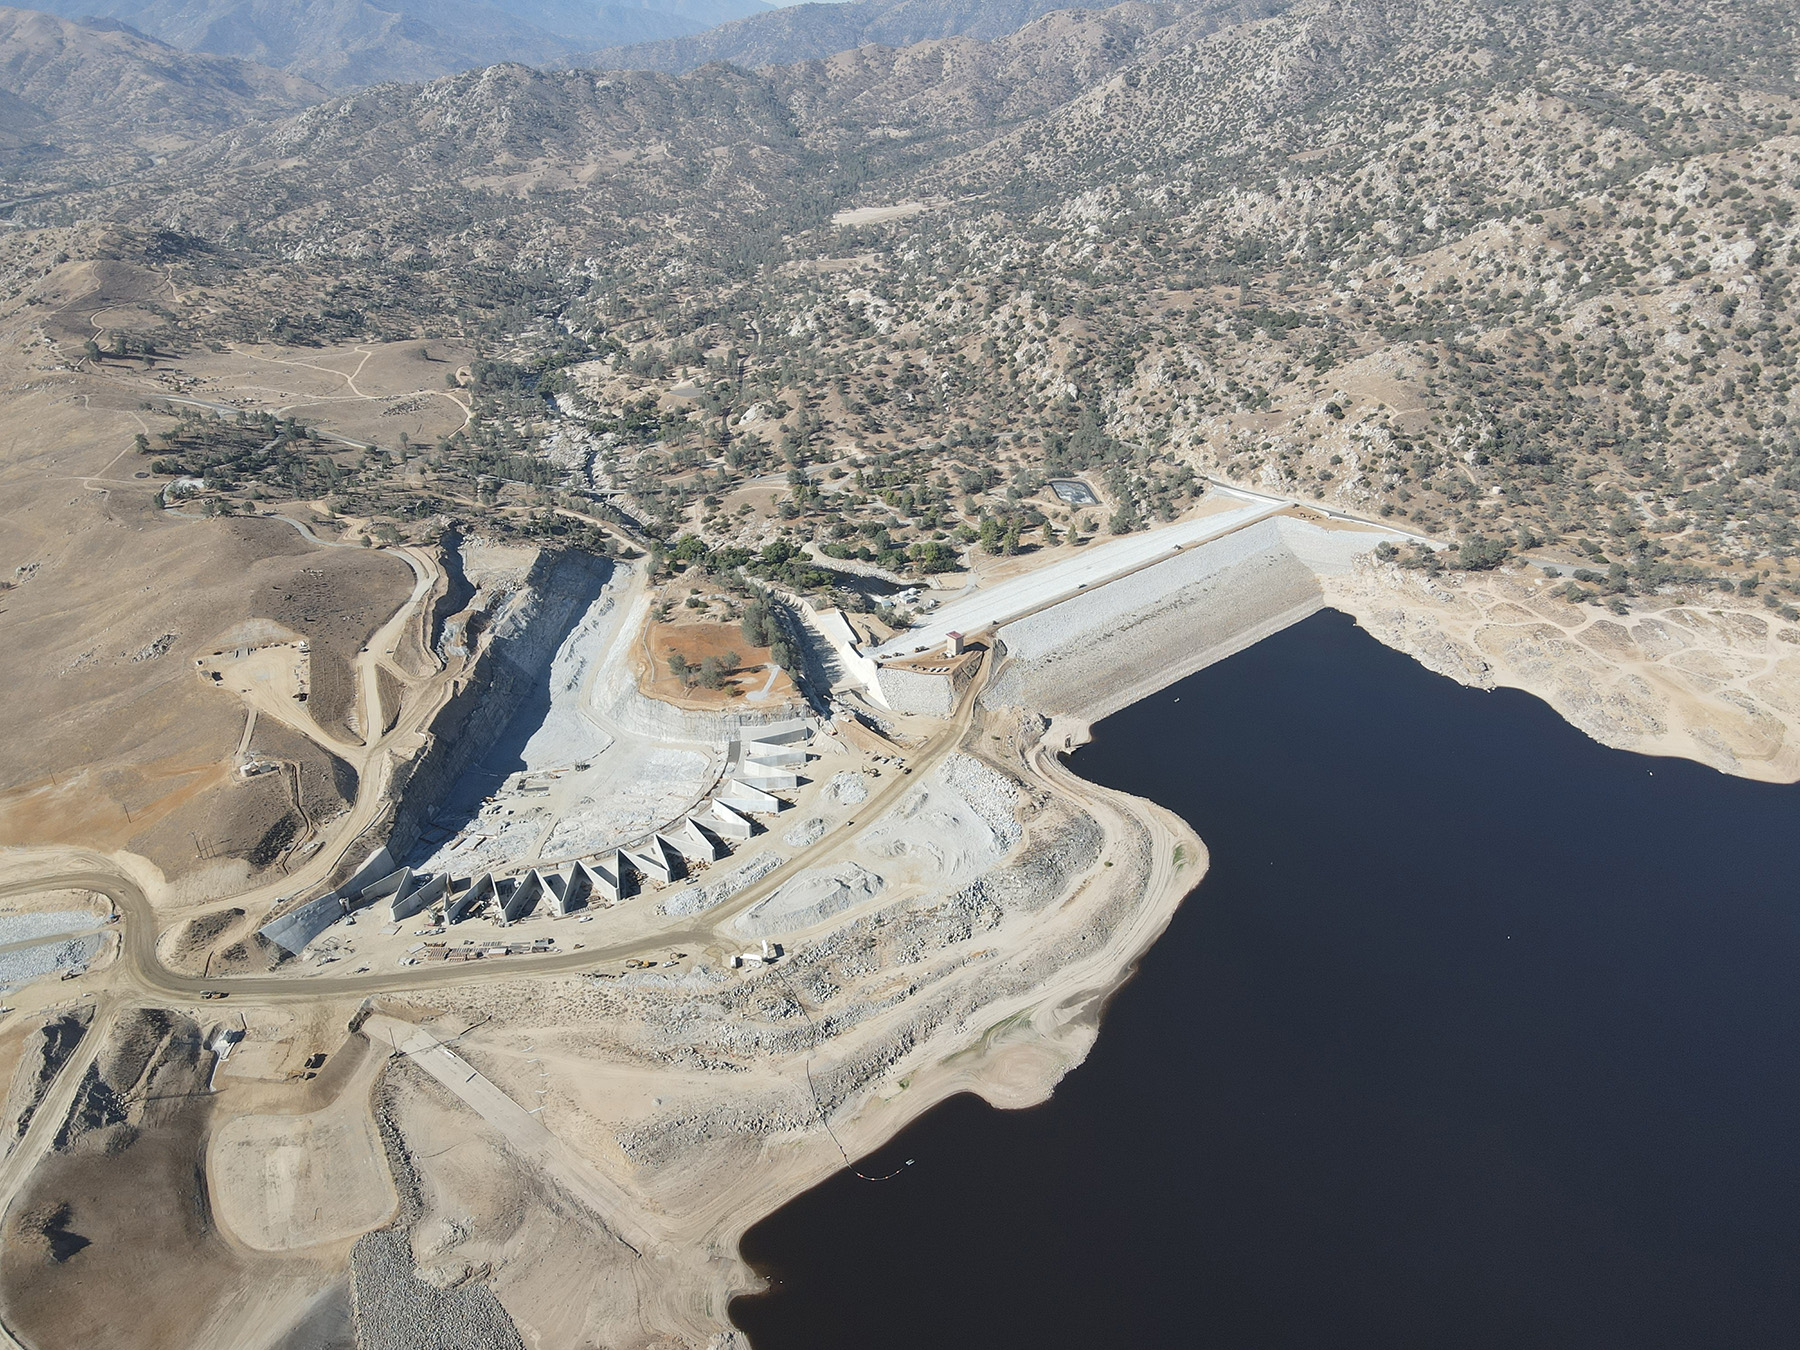 Aerial photograph of a dam surrounded by a barren landscape